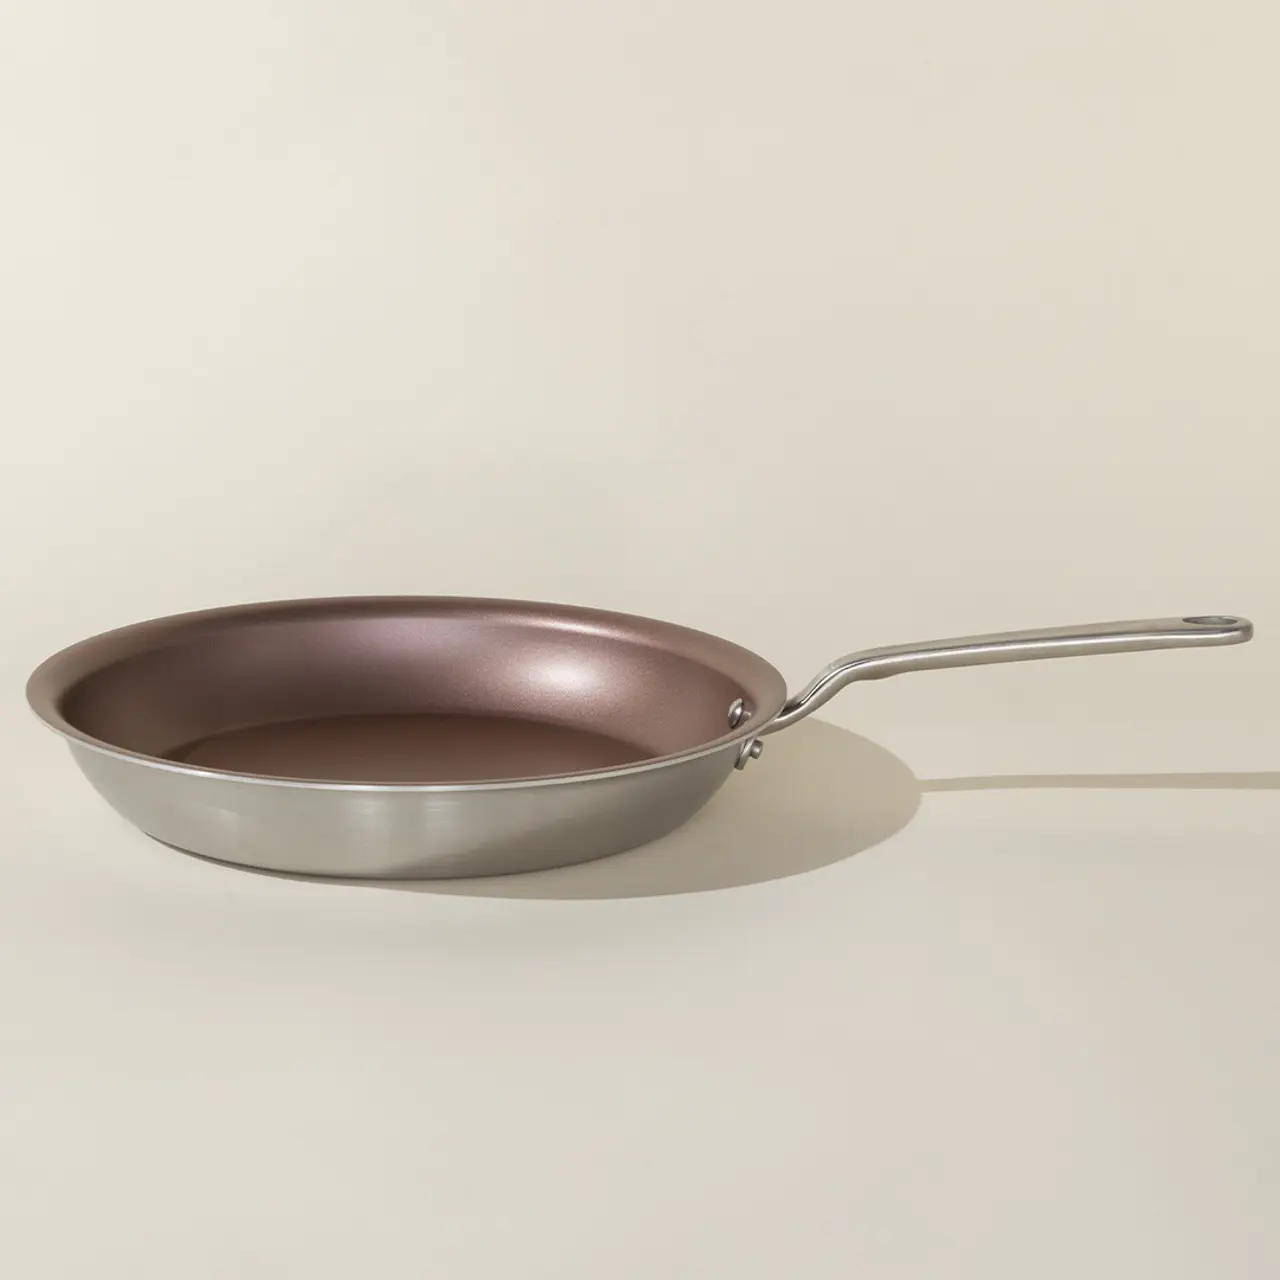 A non-stick frying pan with a stainless steel handle sits against a neutral background.